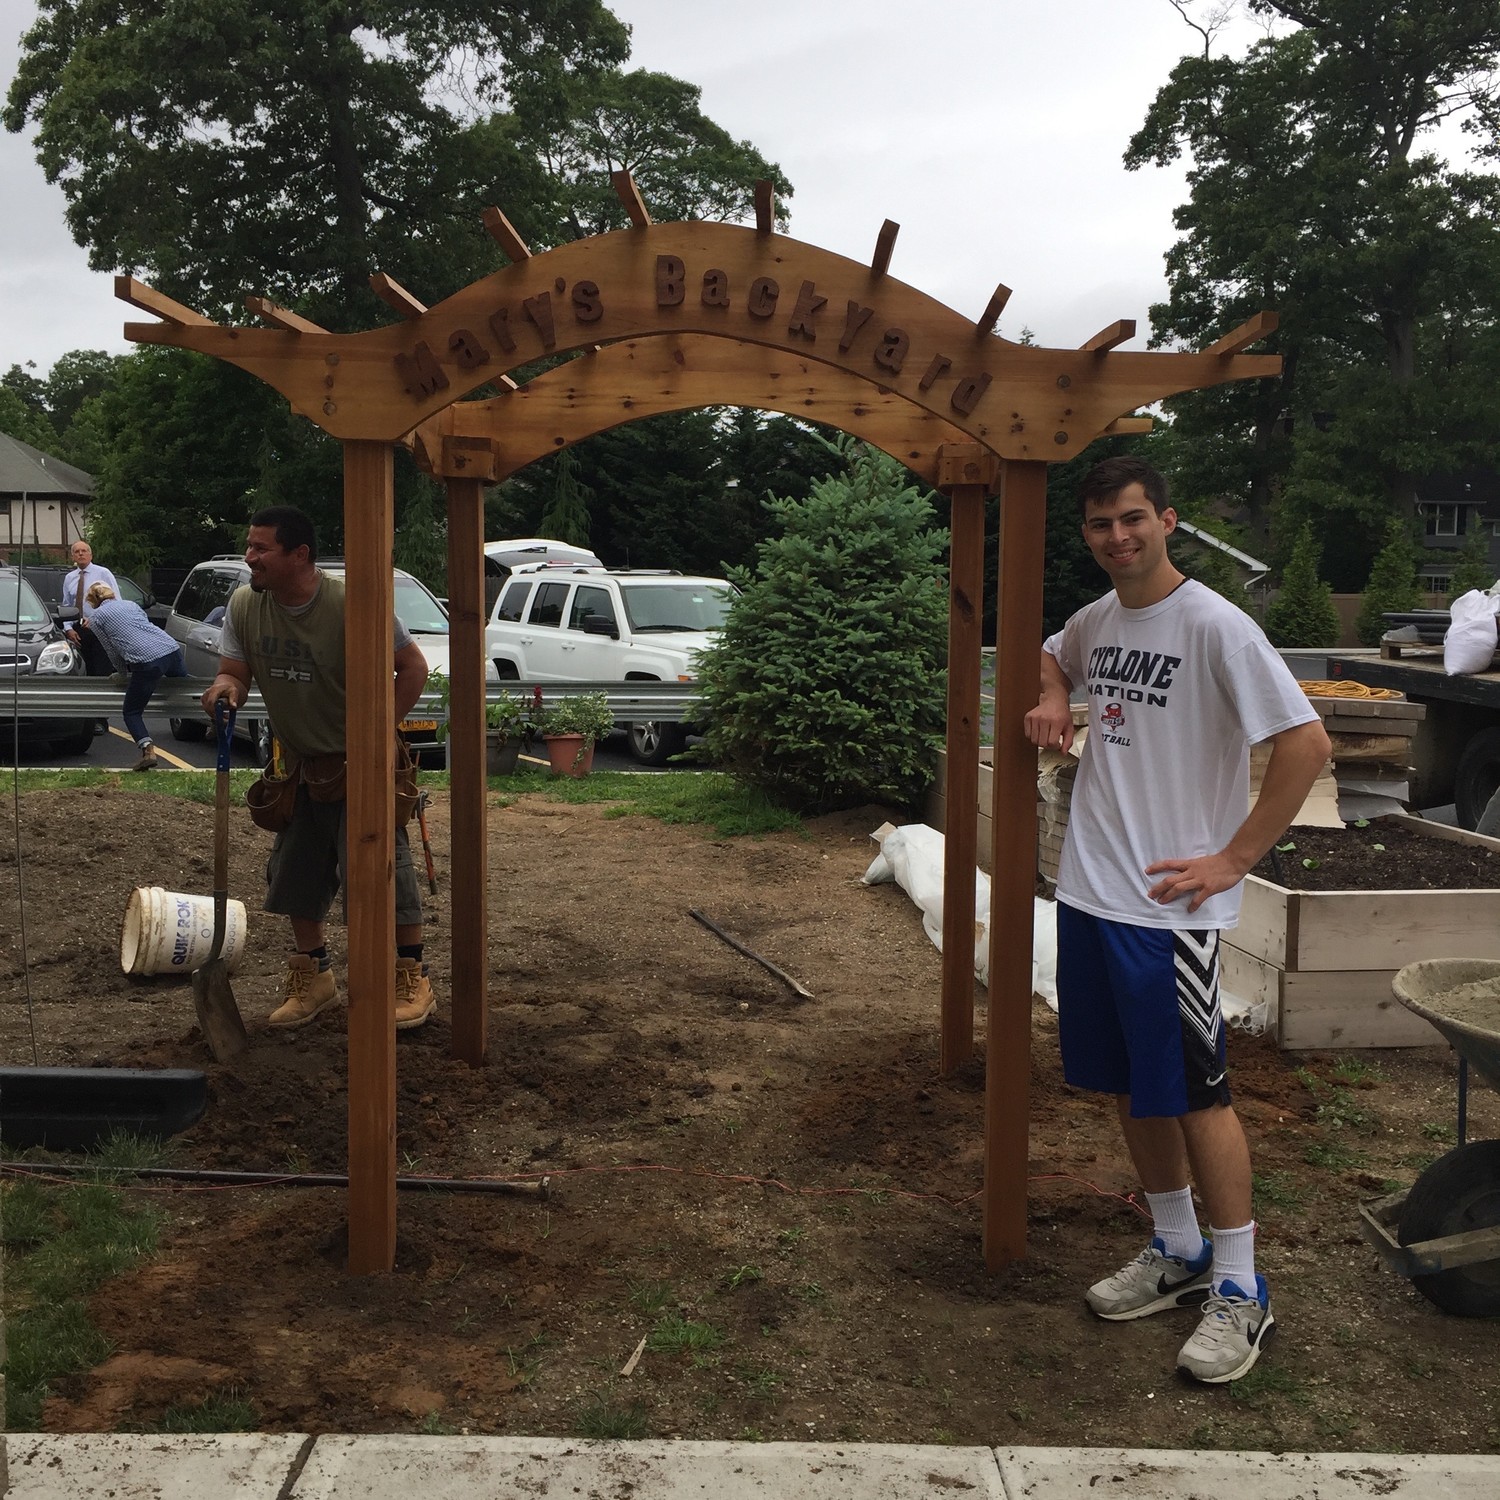 Tyler Wukitsevits, a freshman at Bucknell University who graduated from South Side in the spring, built the archway to Mary's Backyard.